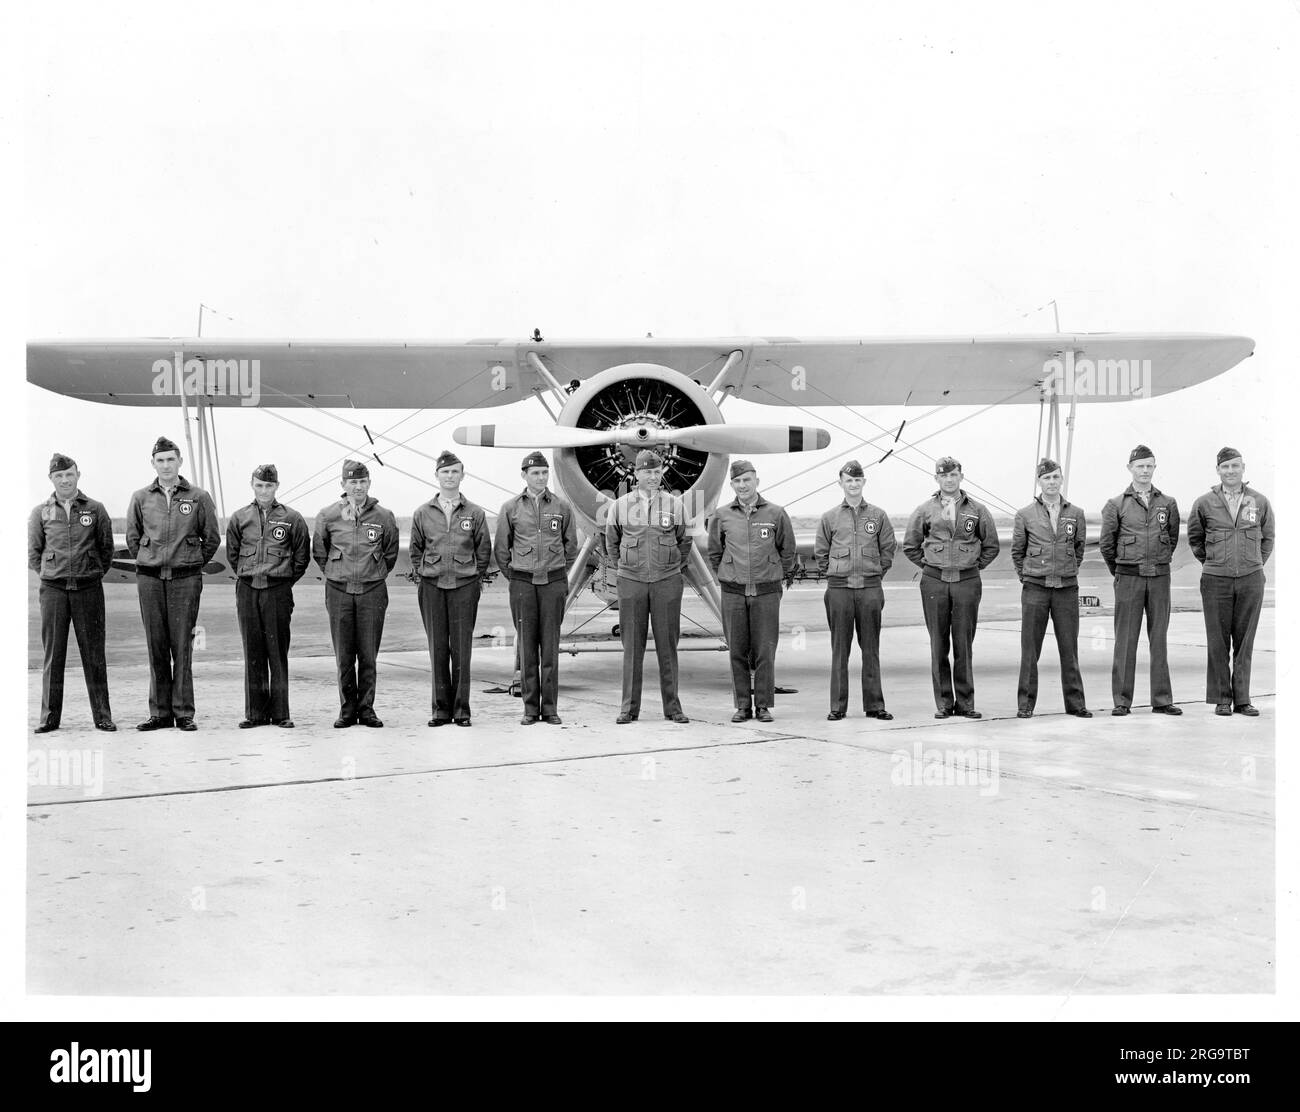 United States Marine Corps - Vought O3U-6 Corsair of VO-8M at Mines Field, Los Angeles, California, for the 1936 National Air Races. The Marine Corps team from VO-8M of the 2nd Marine Brigade; left to right:- 1st. Lieutenant James M. Daly 1st. Lieutenant John Wehle Captain Frank H. Schwable Captain Raymond E. Hopper Captain John N. Hart Captain Frank H Lamson-Scribner Captain Thomas J. Cushman (Commanding Officer) Captain Lawson H.M. Sanderson (Executive officer) Captain Willain C. Lemly Captain Lofton R. Henderson Captain Roger T. Carleson 1st. Lieutenant Ernest R. West 1st. Lieutenant Mazet Stock Photo